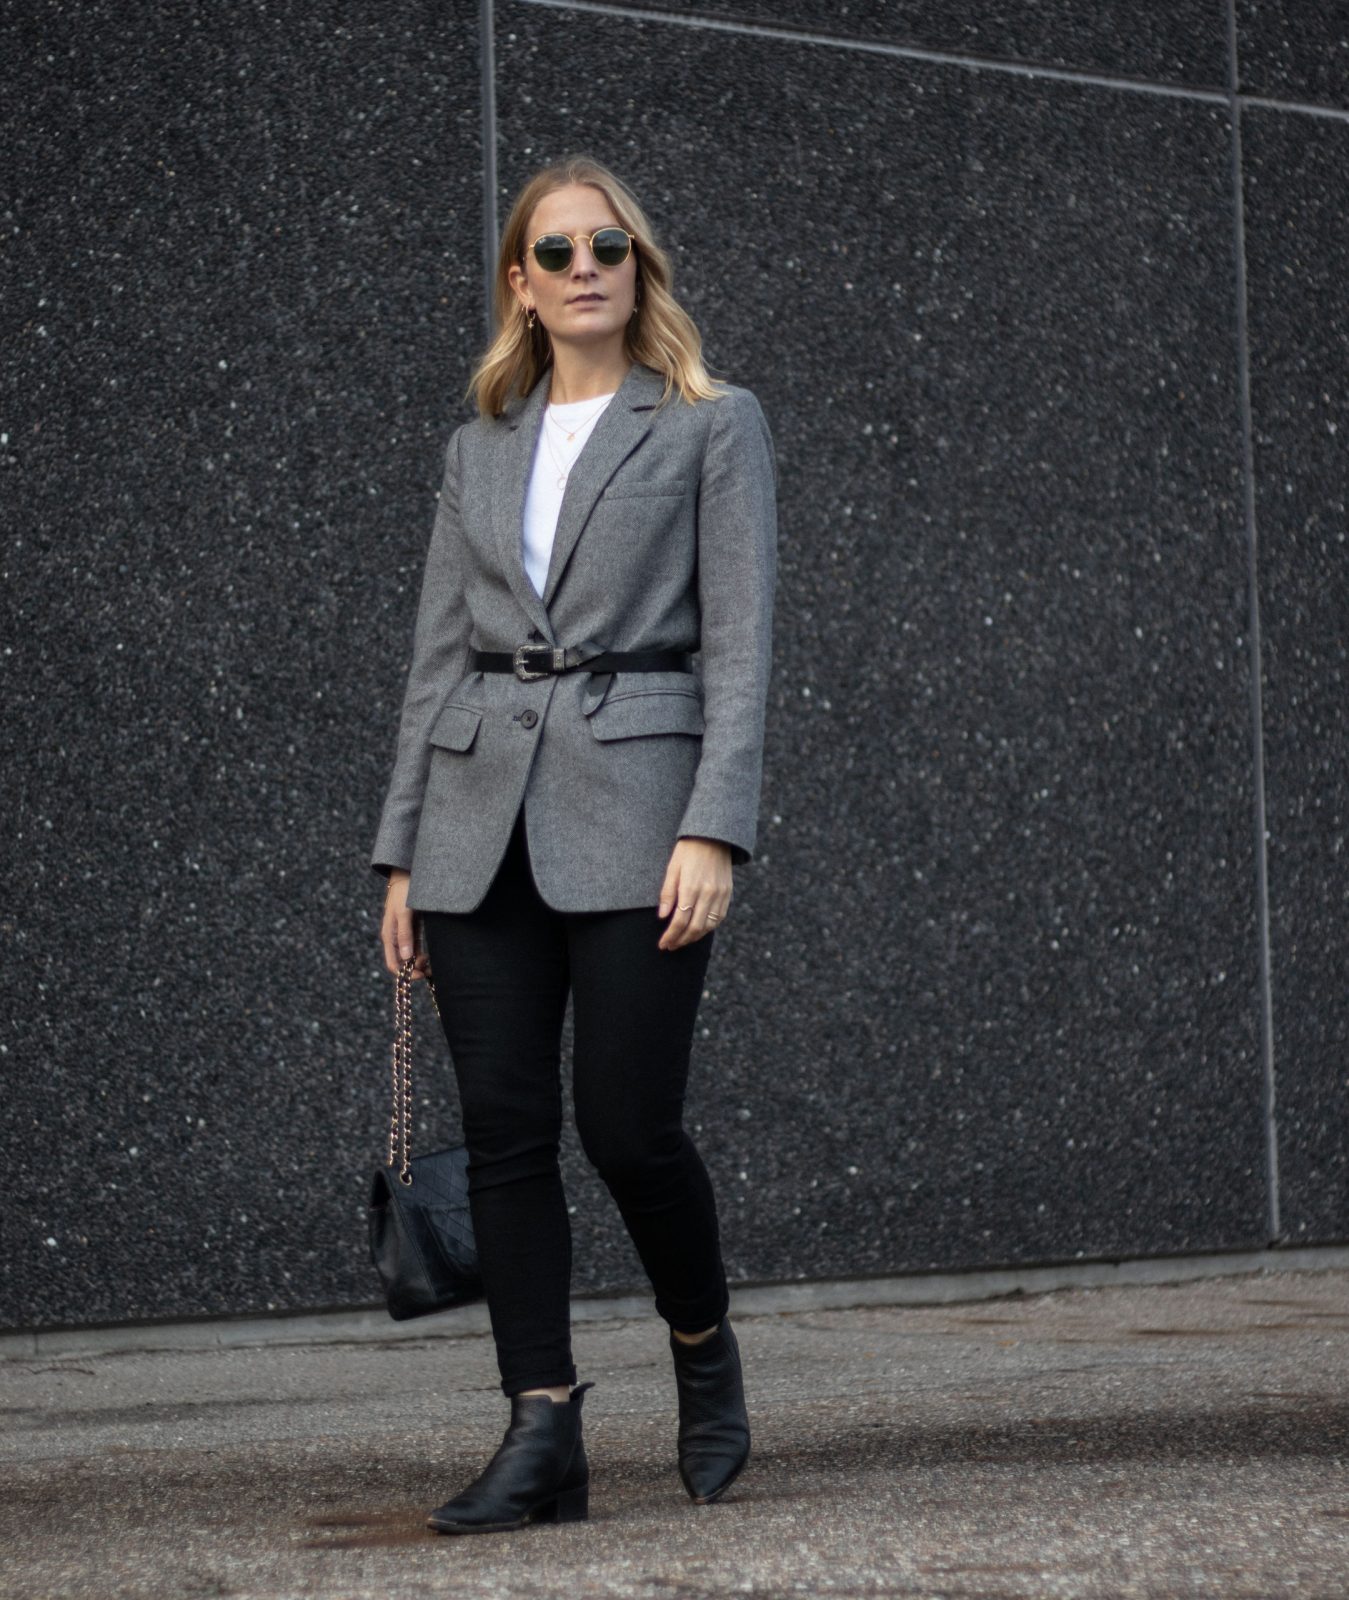 Old faves in new ways: a simple way to update your good old blazer